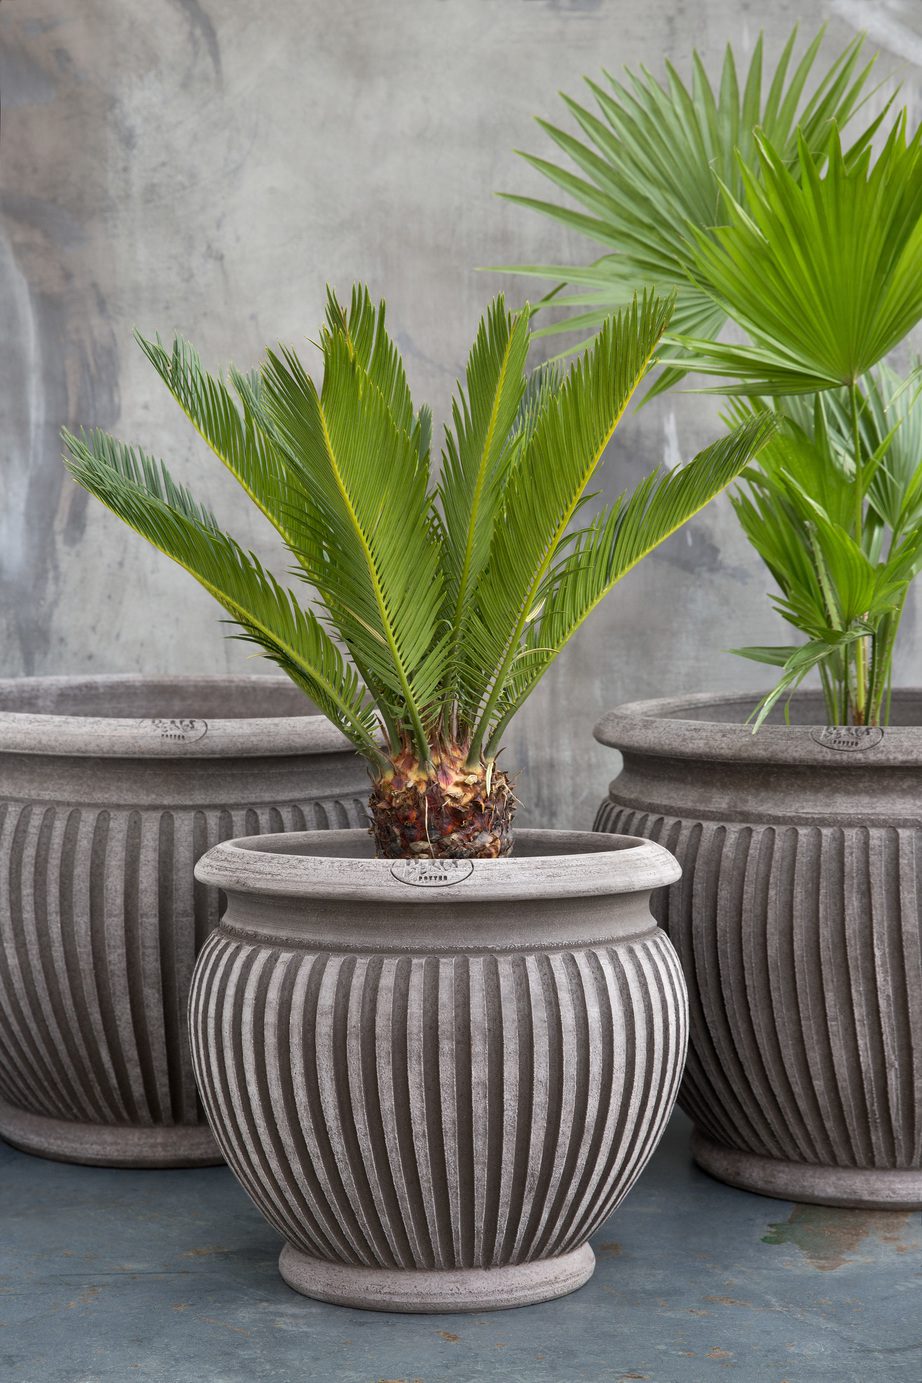 Three grey curved pots with vertical lines and two palm trees